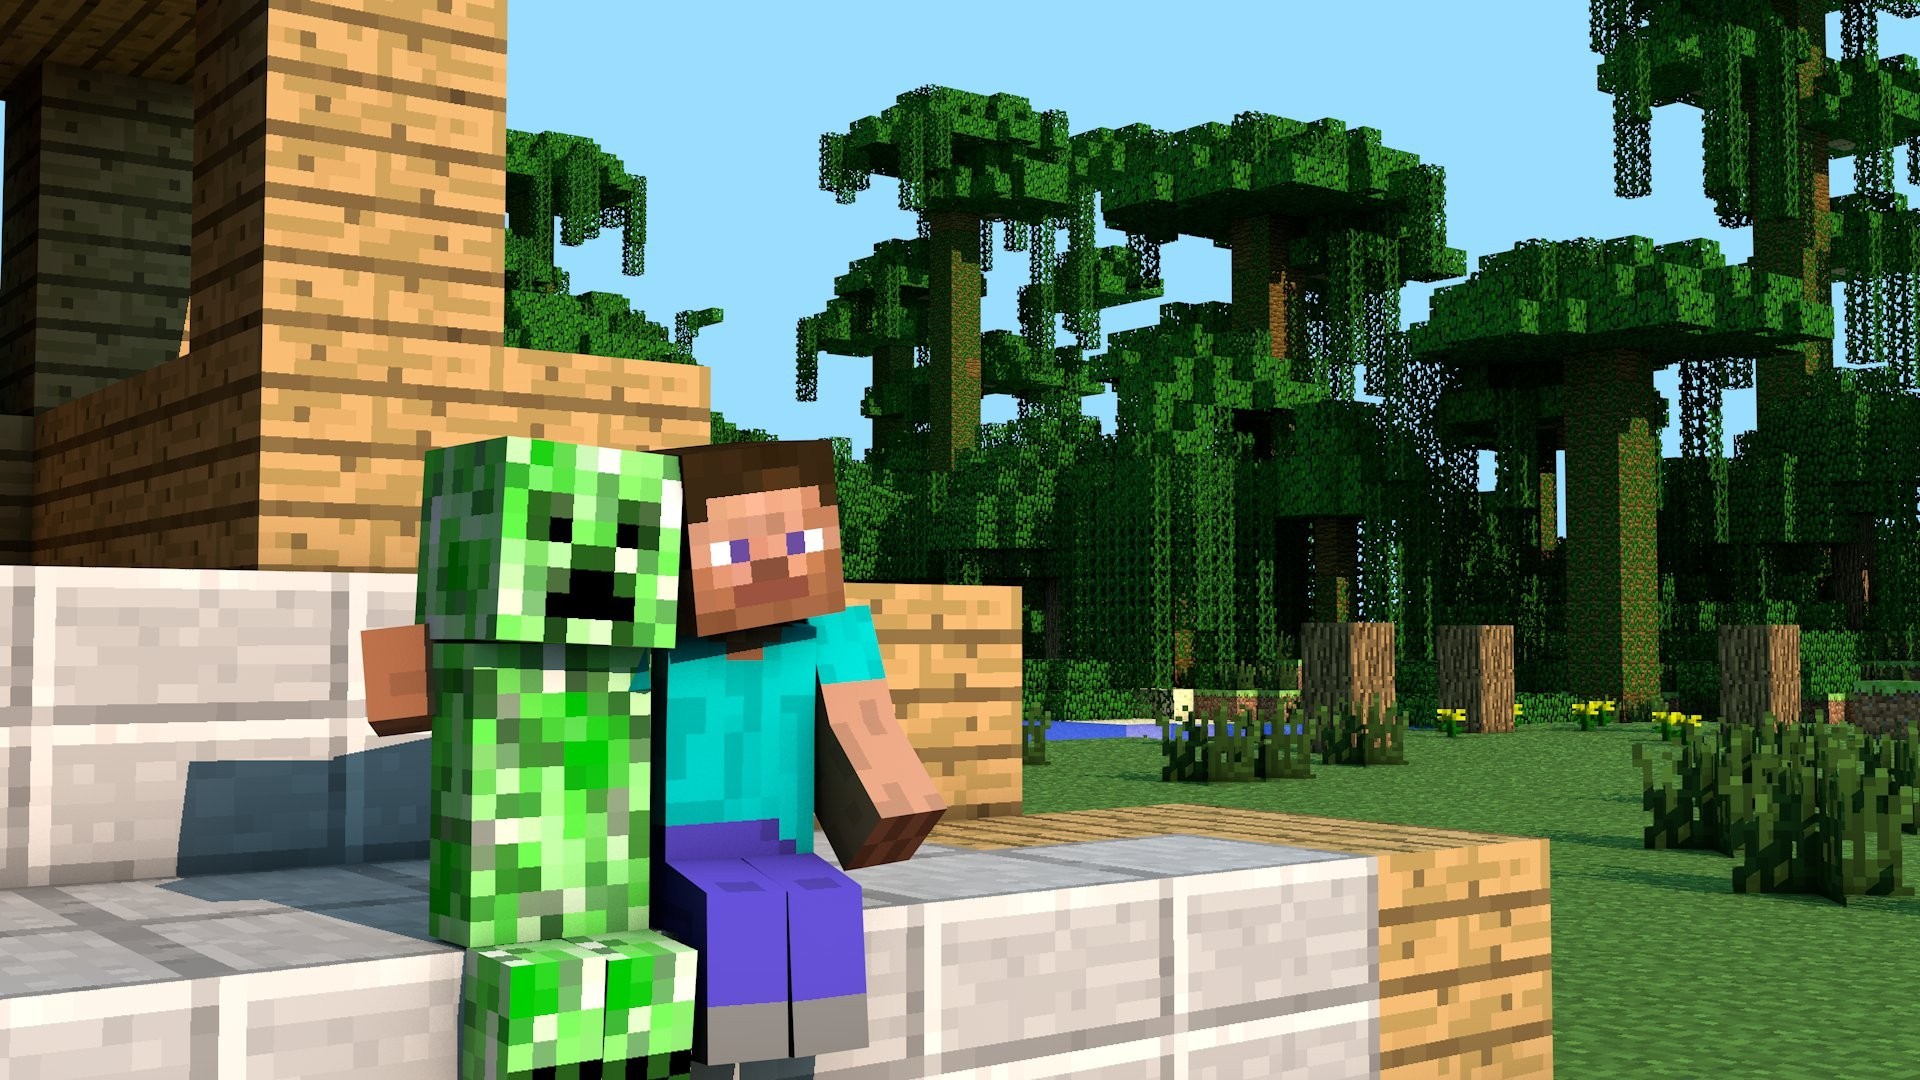 Rumor: A Minecraft strategy game is in development